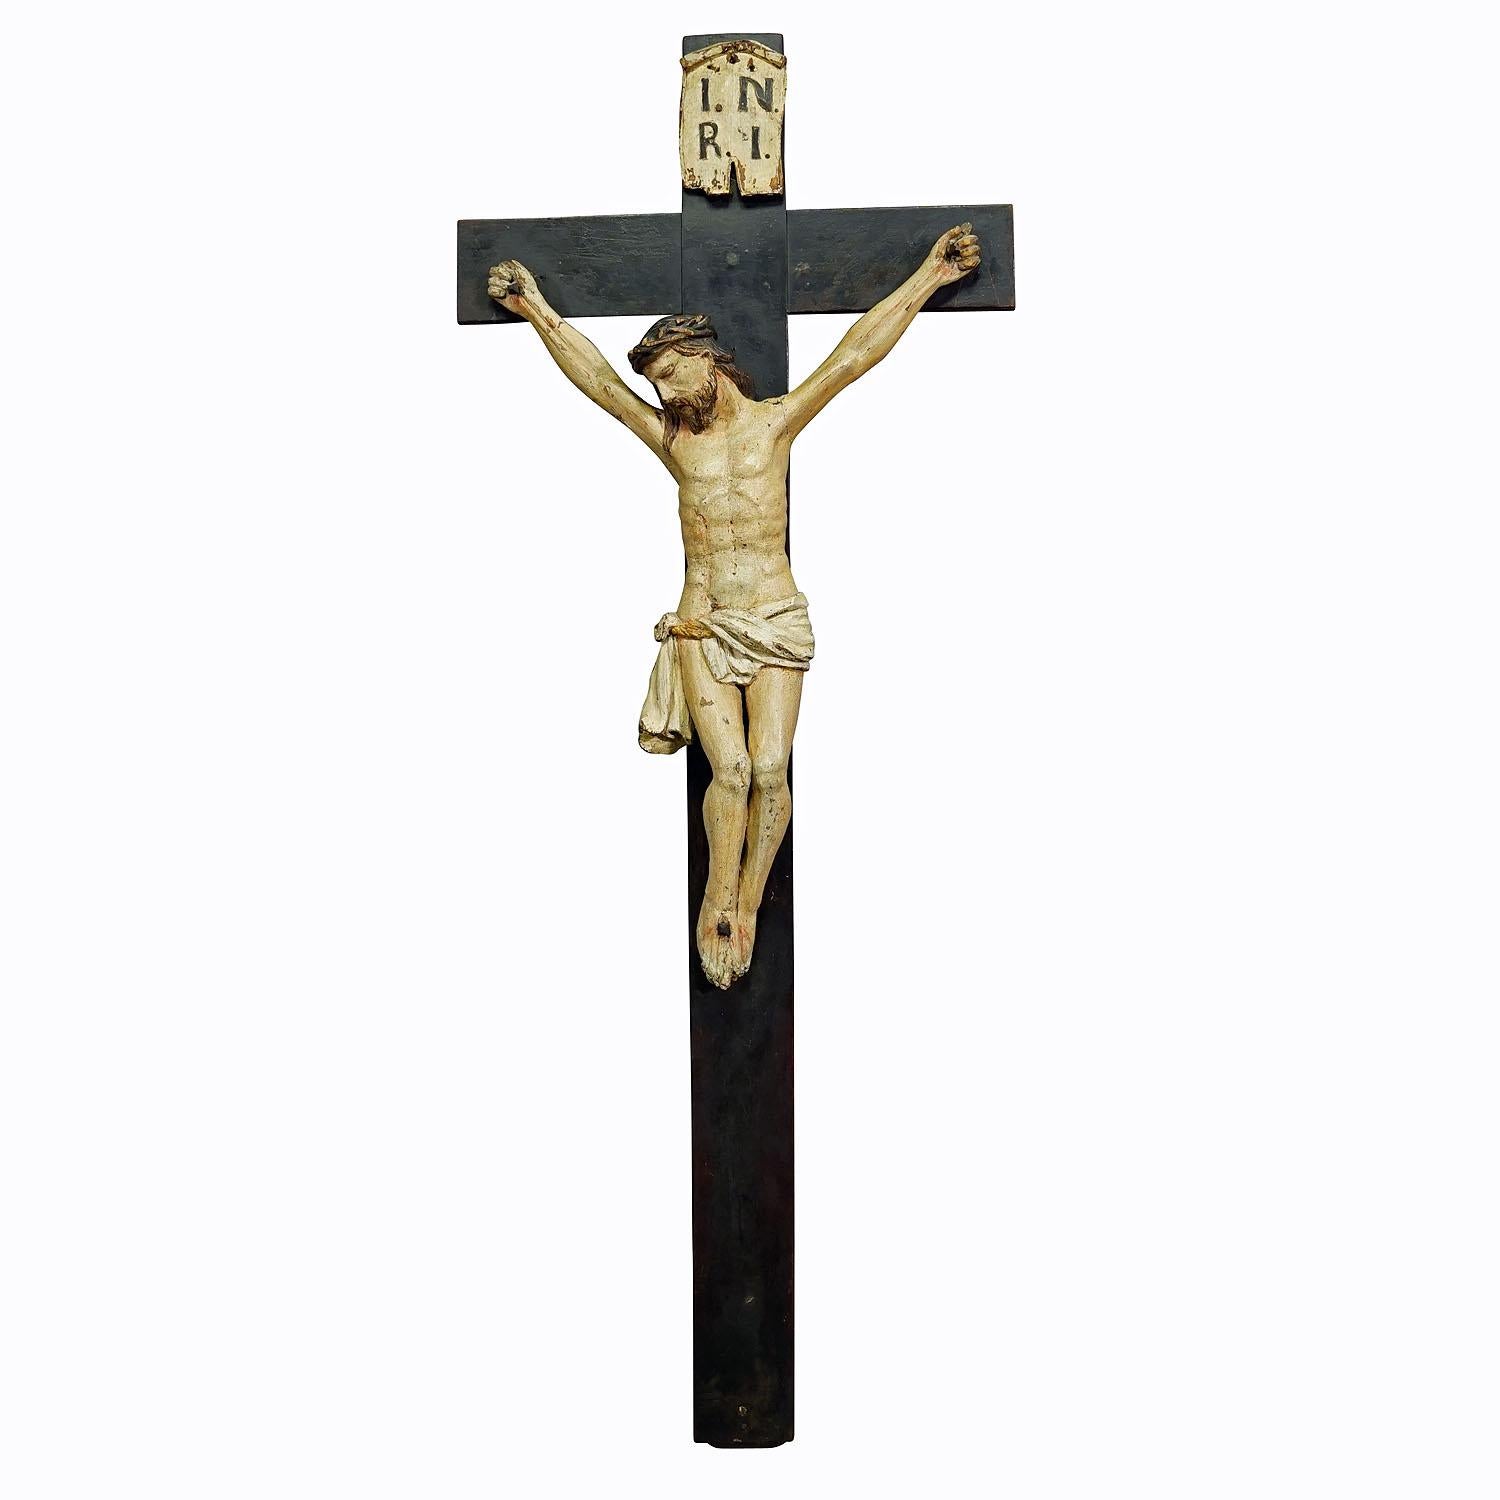 19th Century Bavarian Wooden Carved Crucifix

Antique crucifix with a sculpture of a suffering Christ on the cross stunning hand carved details and an amazing patina. Handcarved in Bavaria late 19th century. The very well carved body and suffering